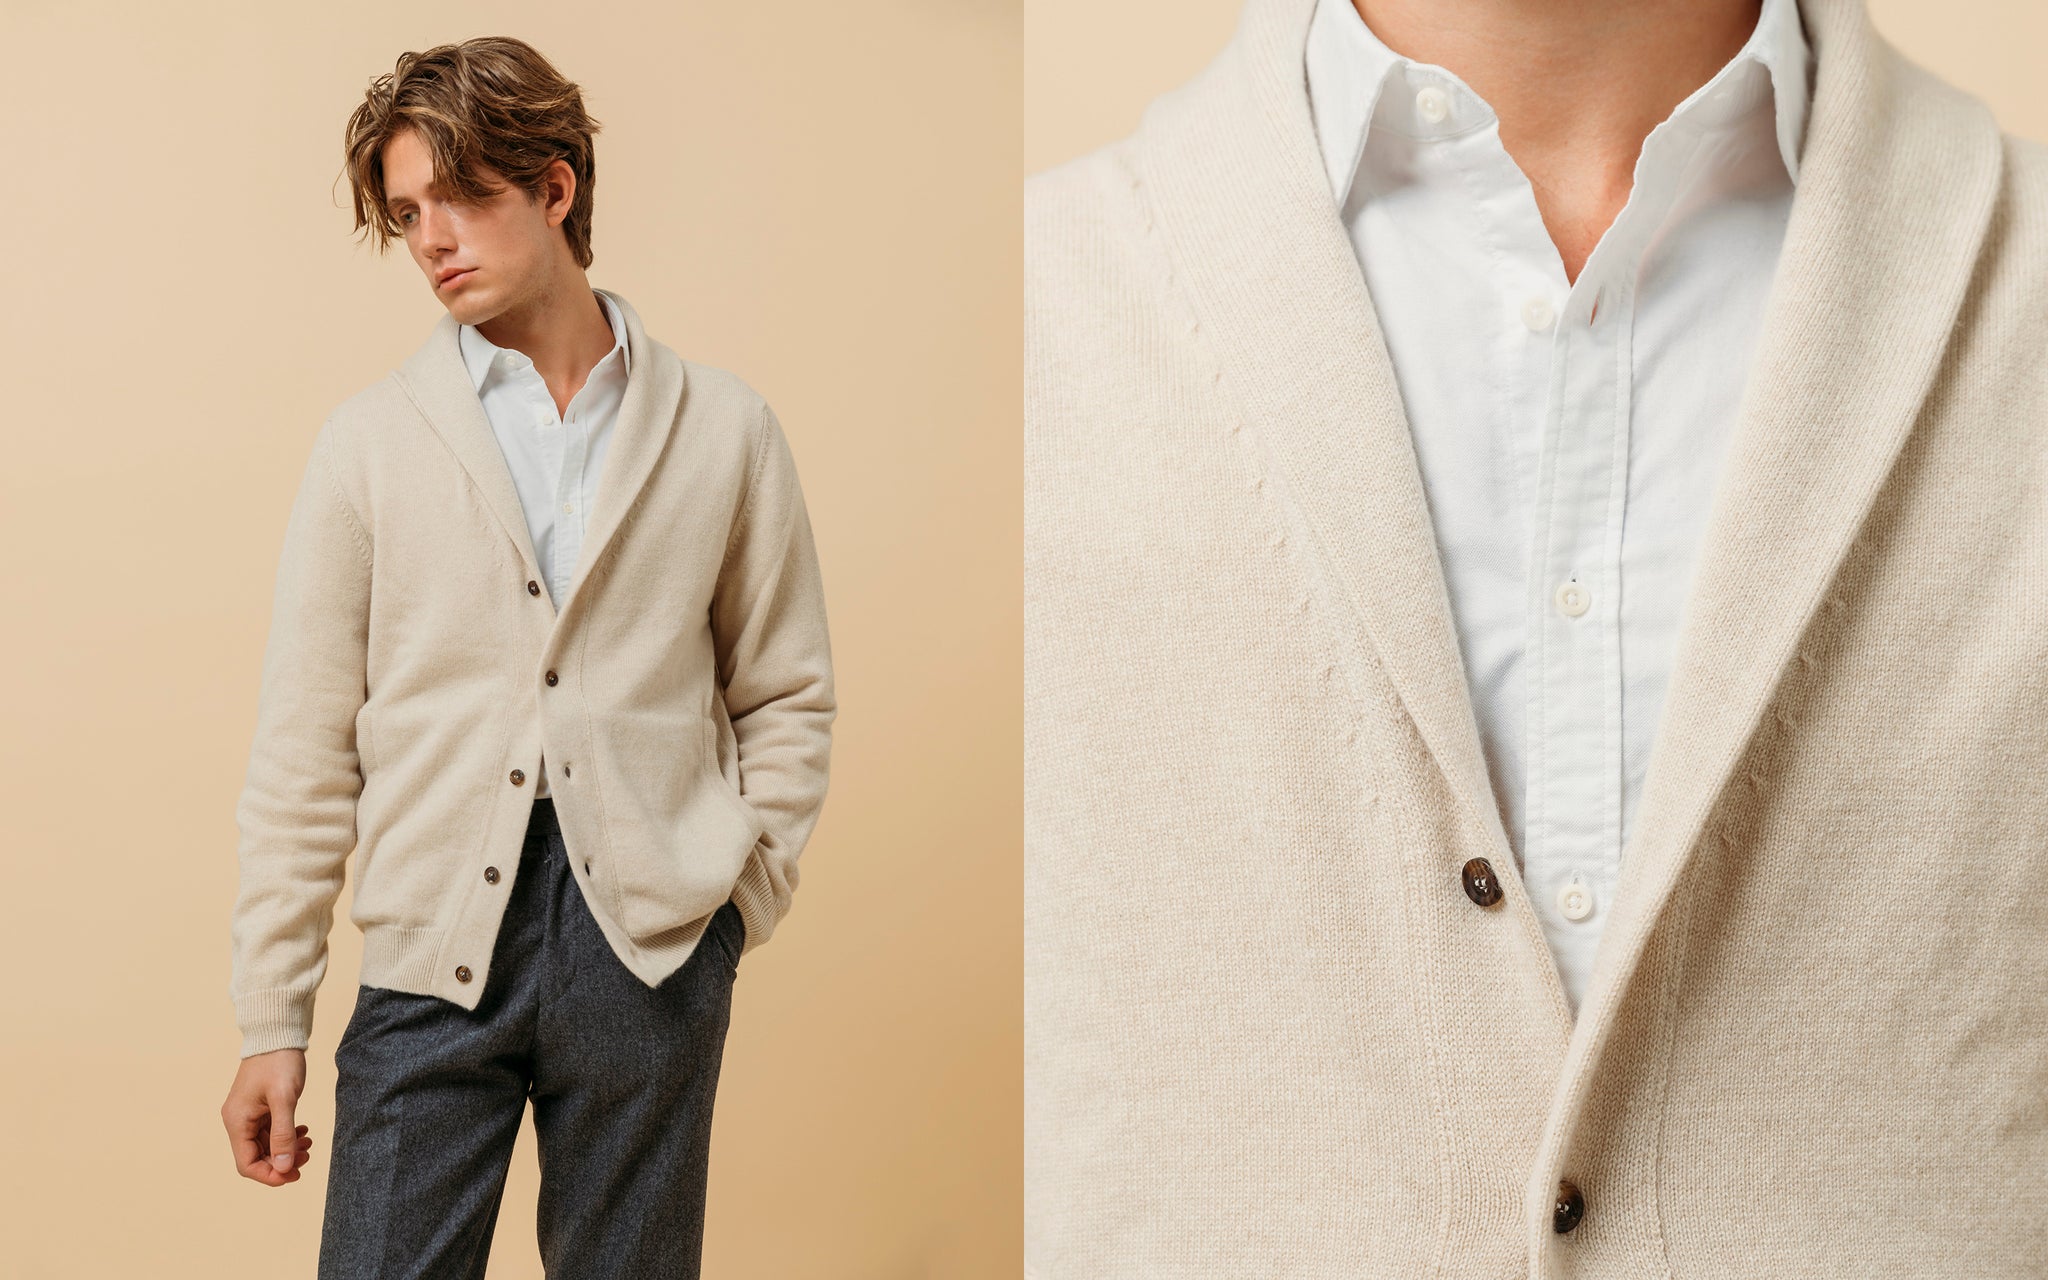 Introducing the Cashmere Painter's Shawl Collar Cardigan